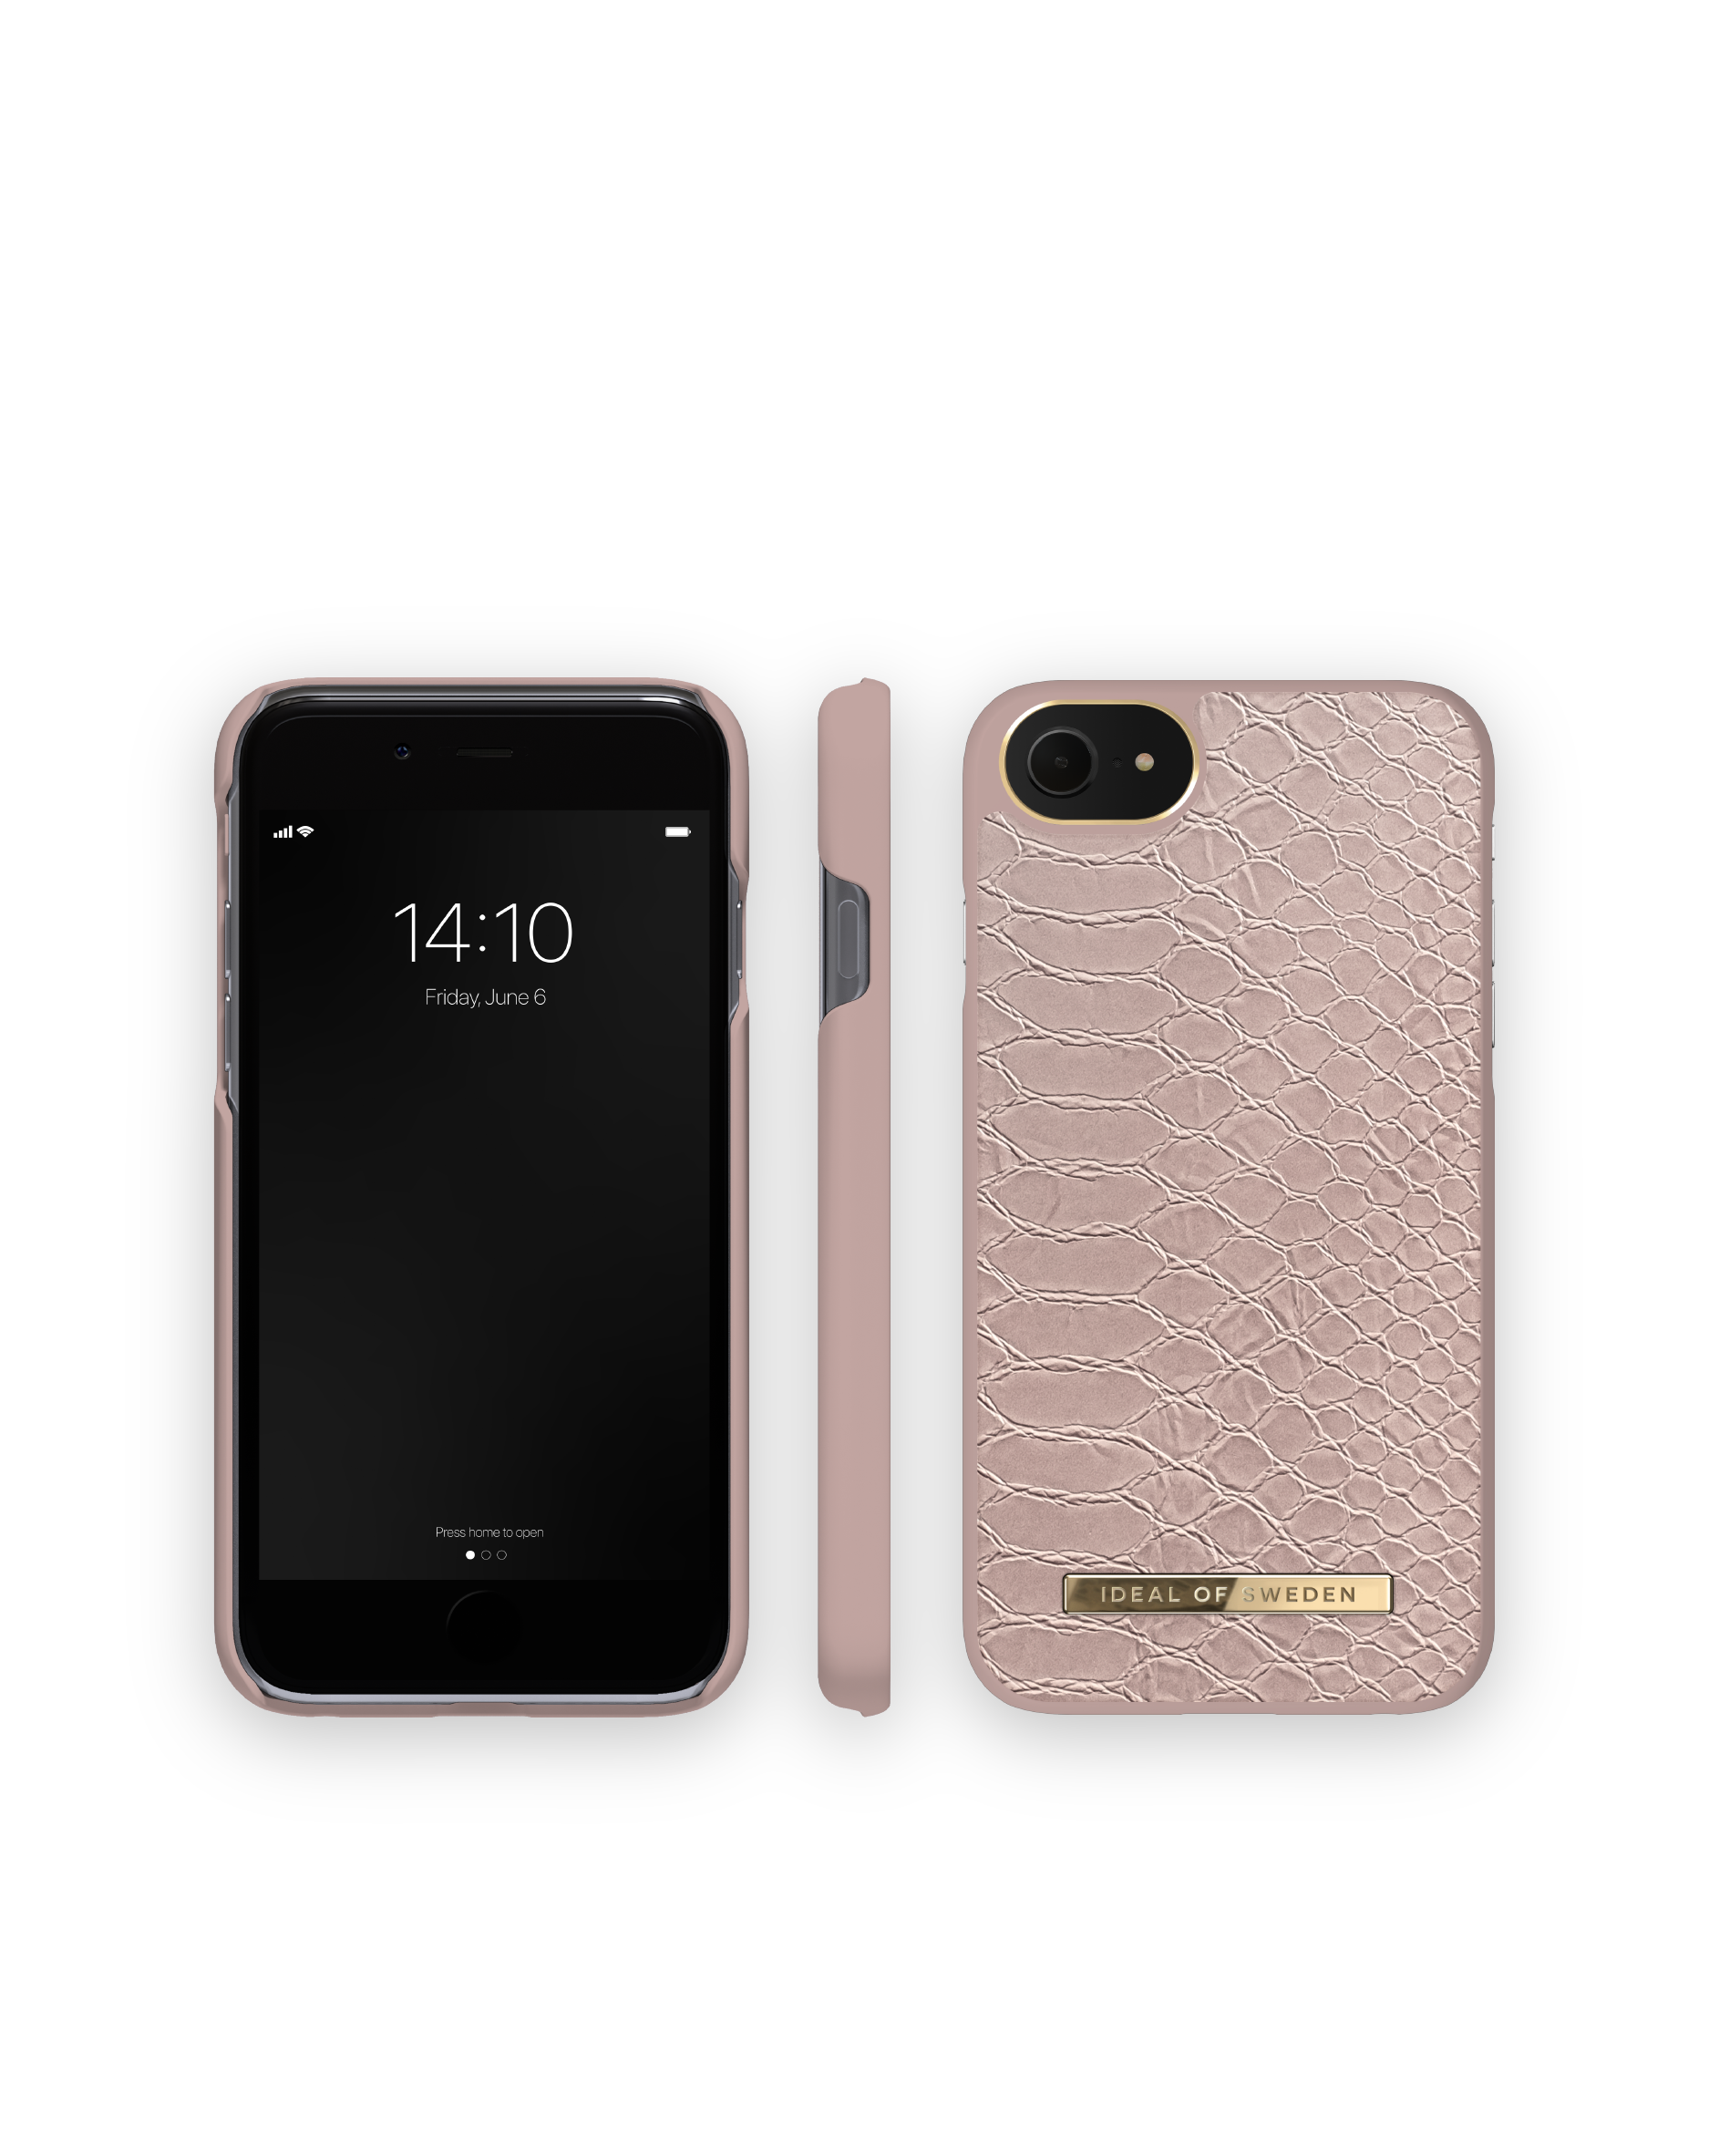 IDEAL OF iPhone SE iPhone Apple 8, Backcover, Apple Rose Apple, 6(S), SWEDEN iPhone Apple IDACAW20-I7-244, 7, Snake (2020), Apple iPhone